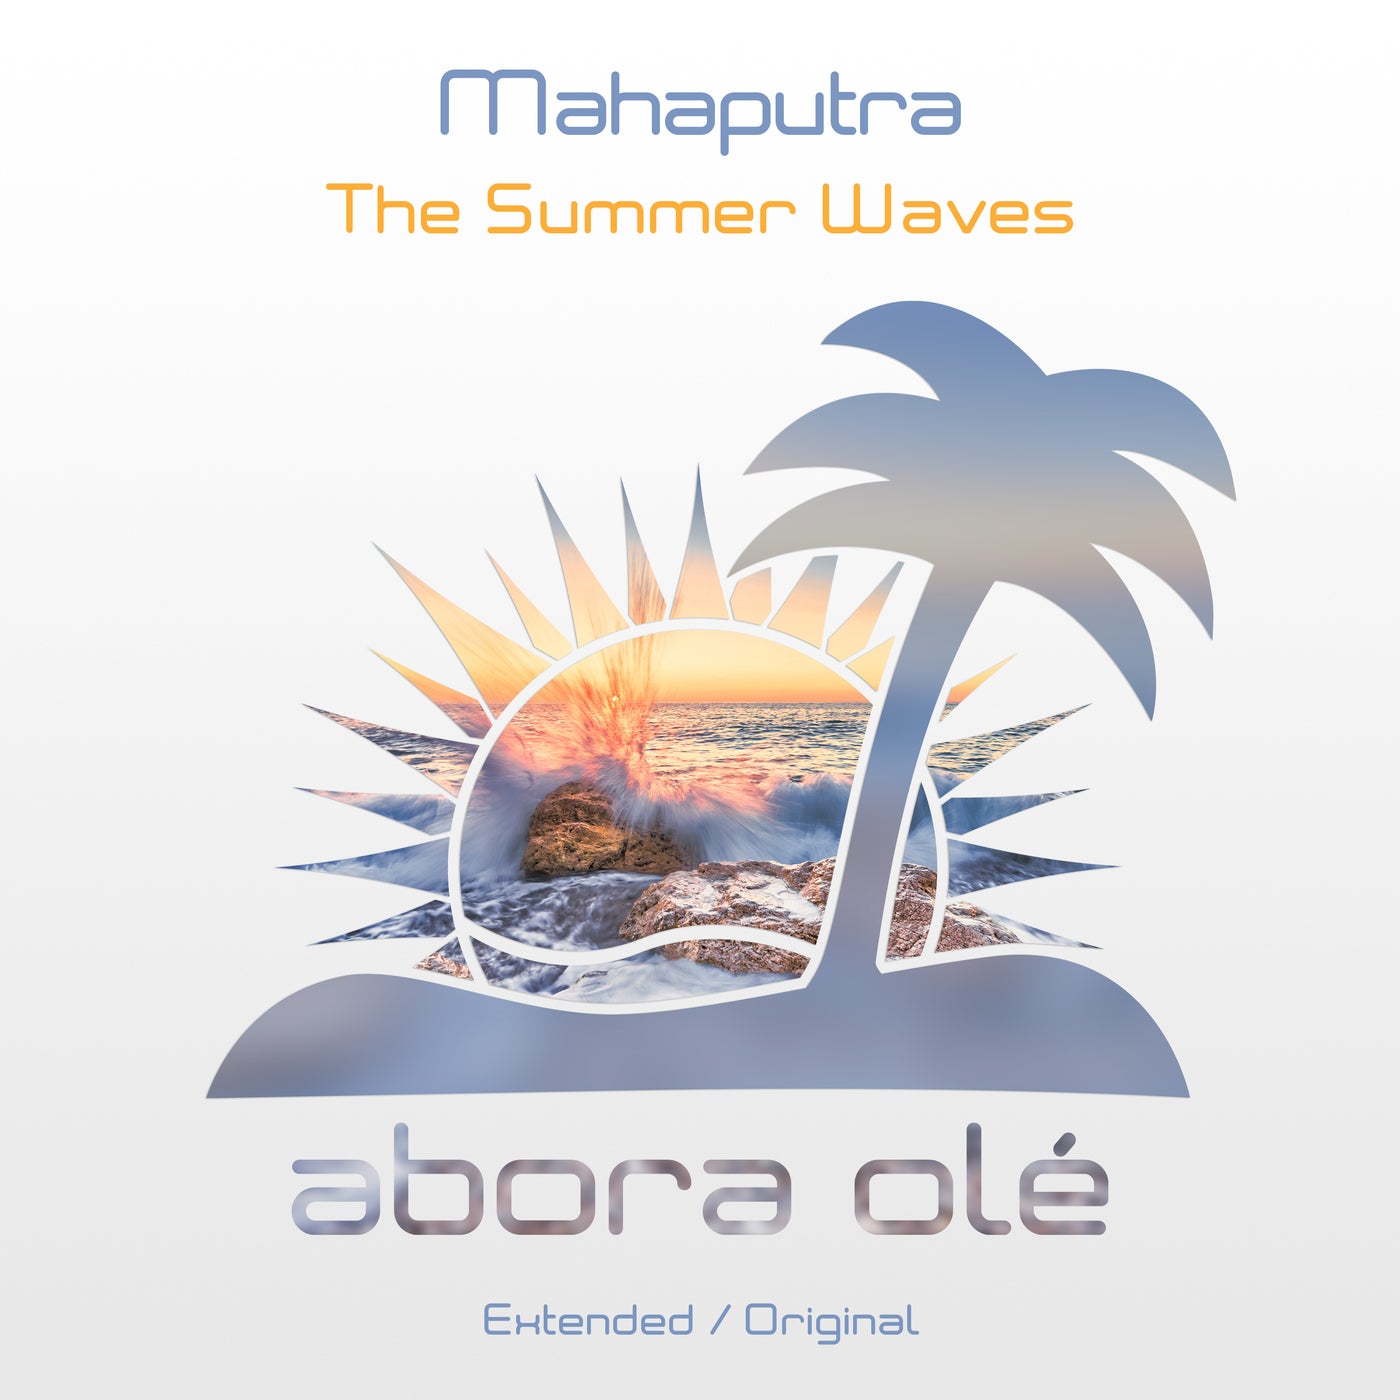 The Summer Waves